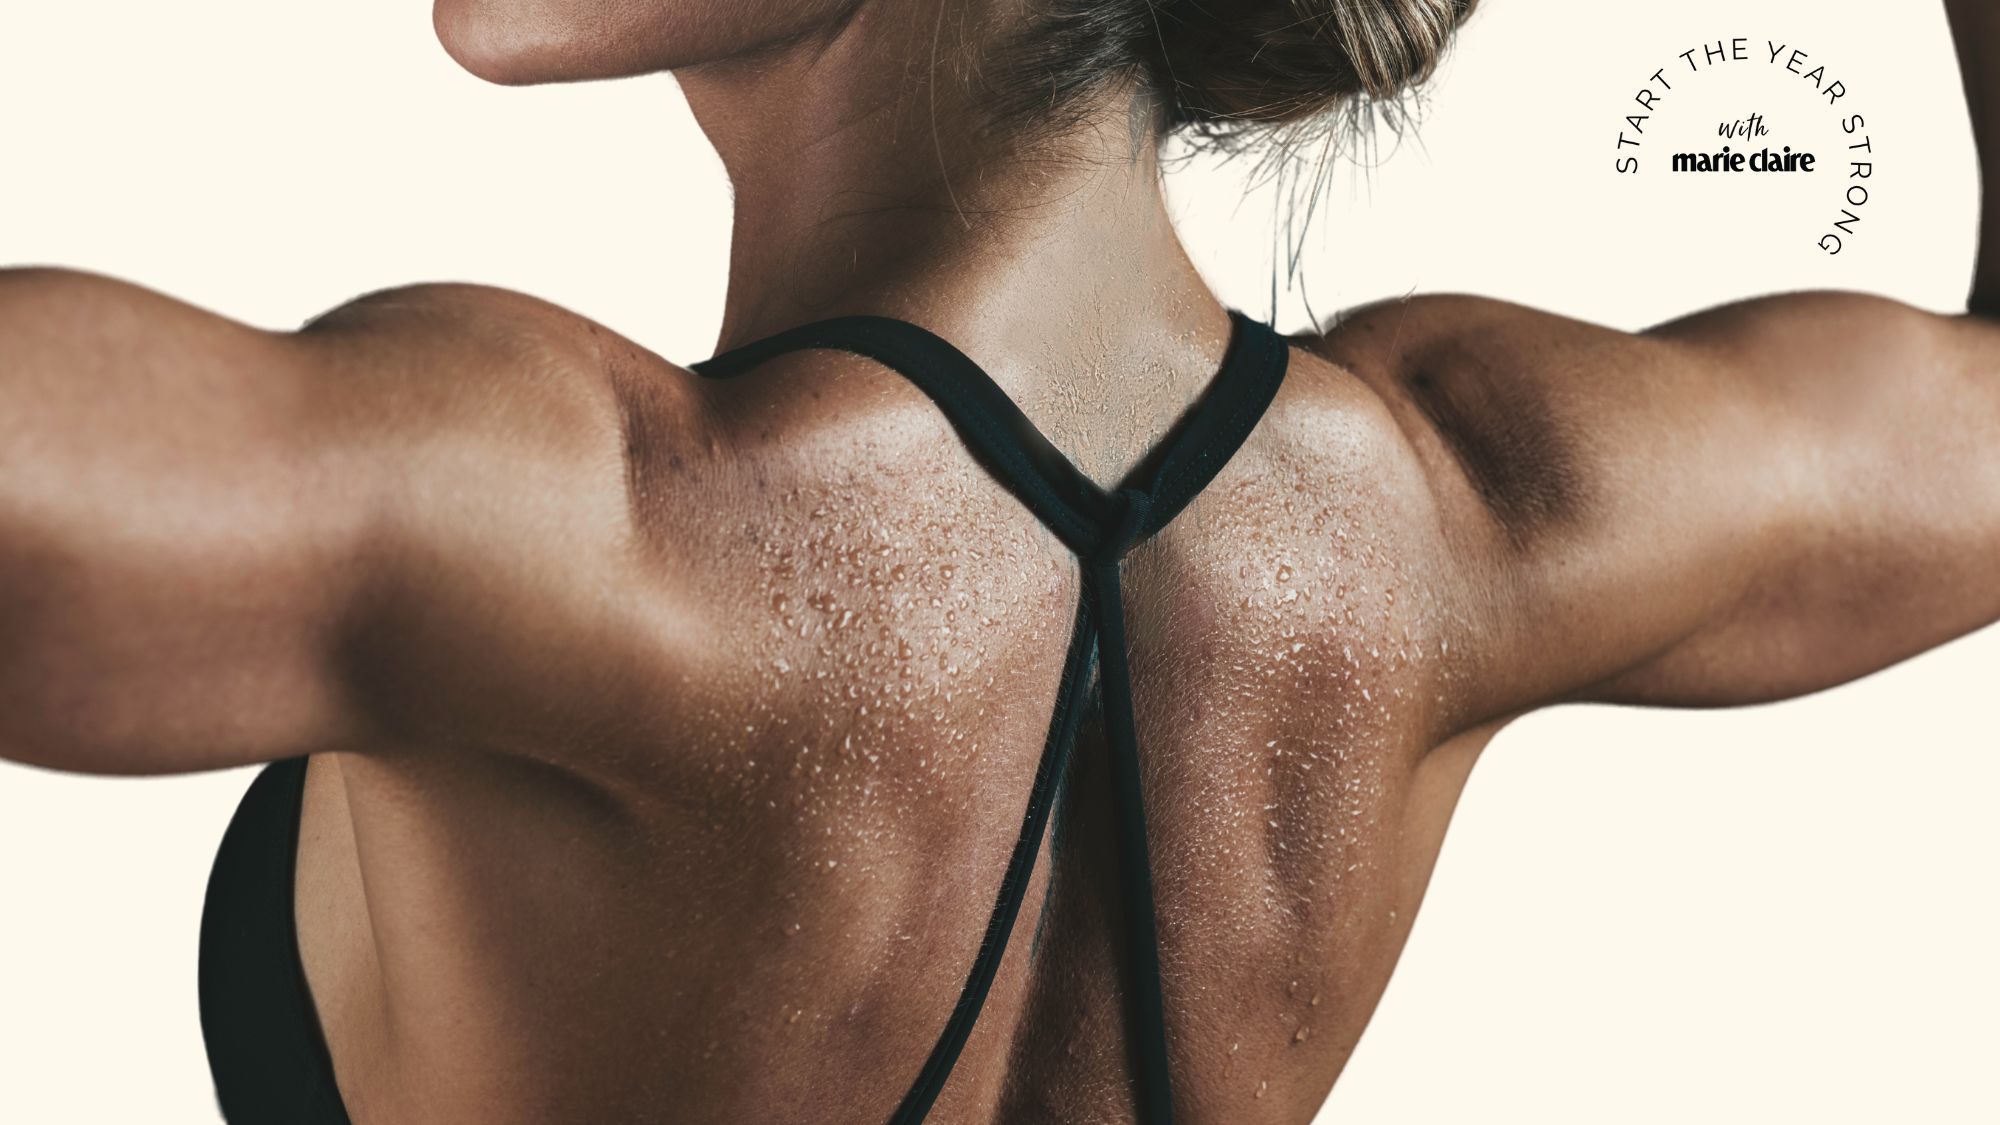 6 Moves to Fix Rounded Shoulders [FIX YOUR POSTURE]